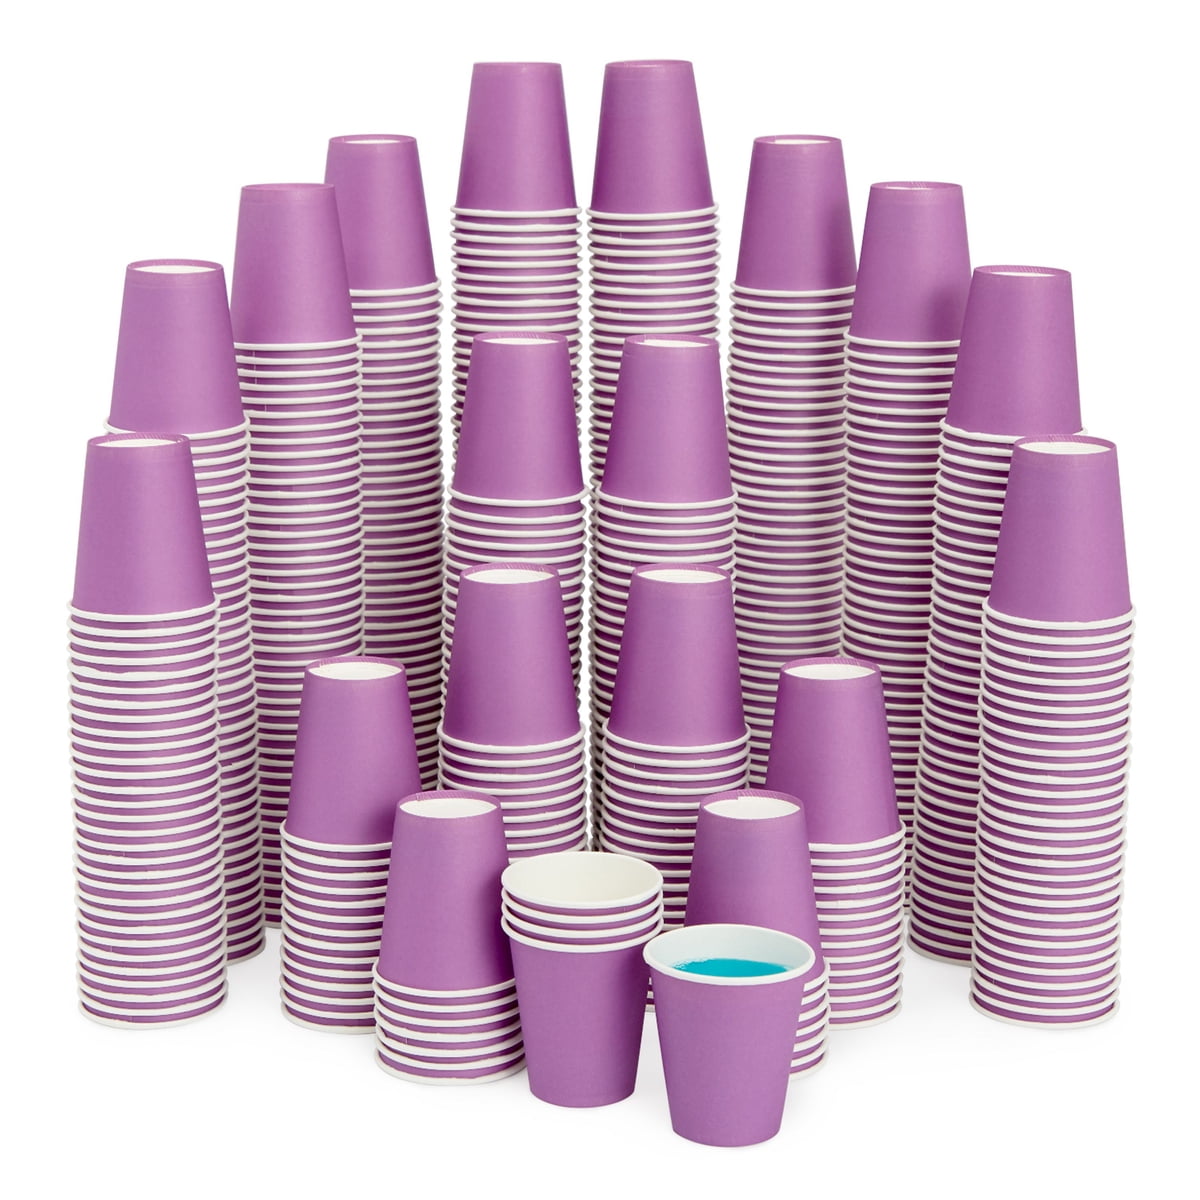 Stockroom Plus Small Paper Cups for Bathroom, 3oz Disposable Mouthwash Cups Bulk (Blue, 600 Pack)